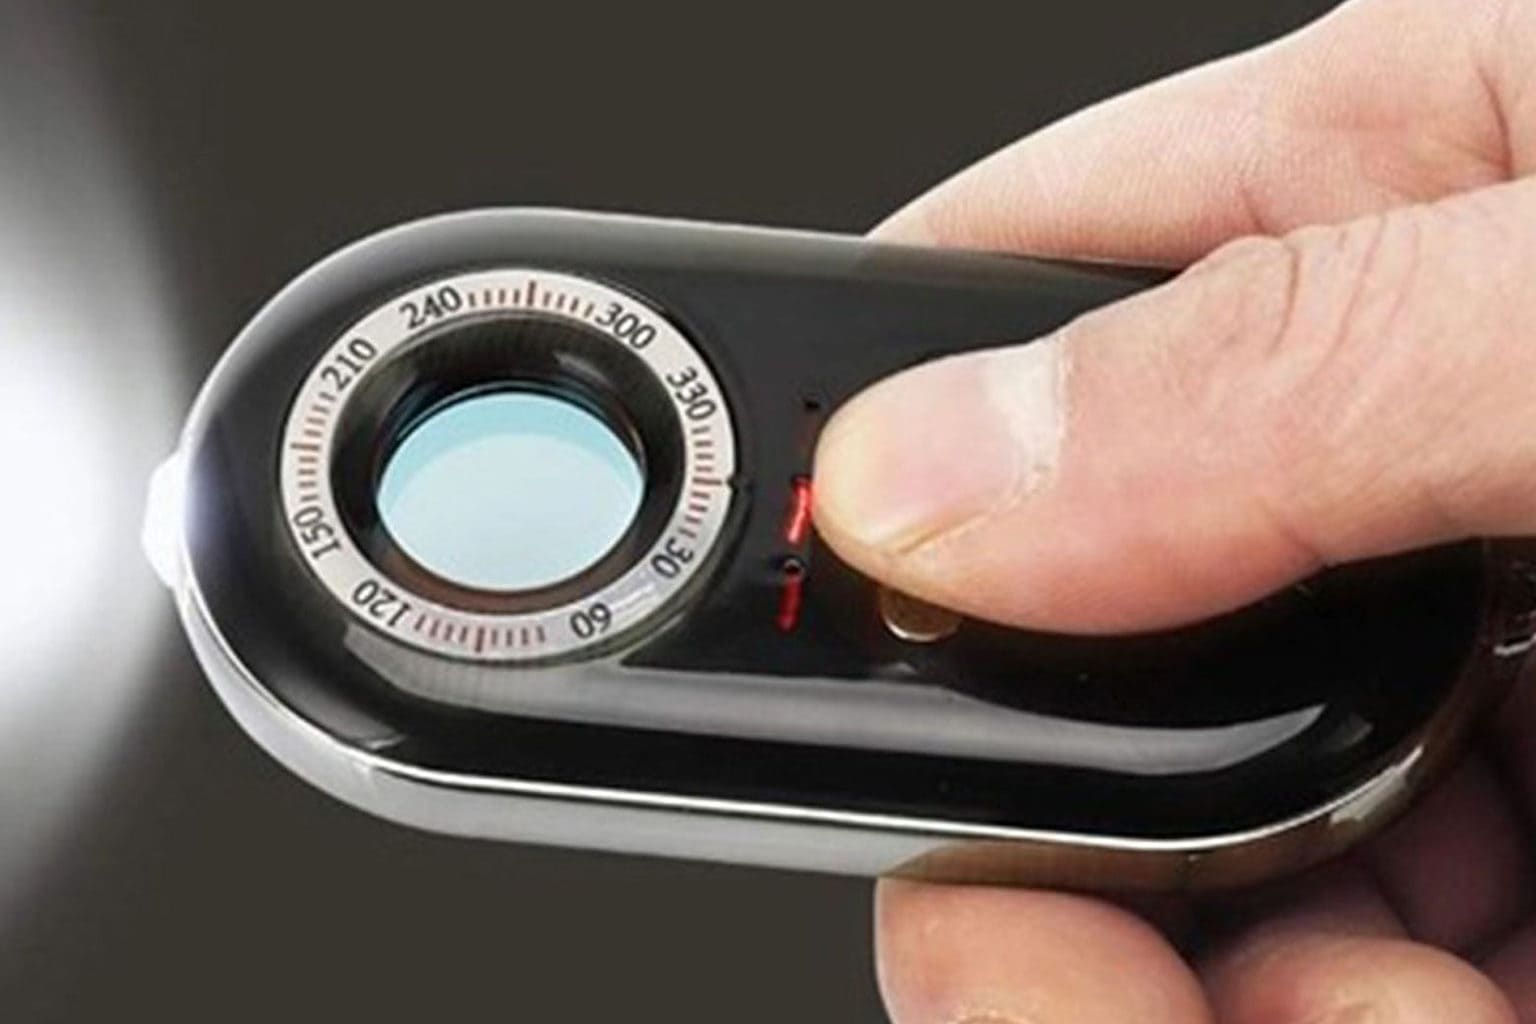 Search for hidden cameras in your hotel with this pocket gadget.